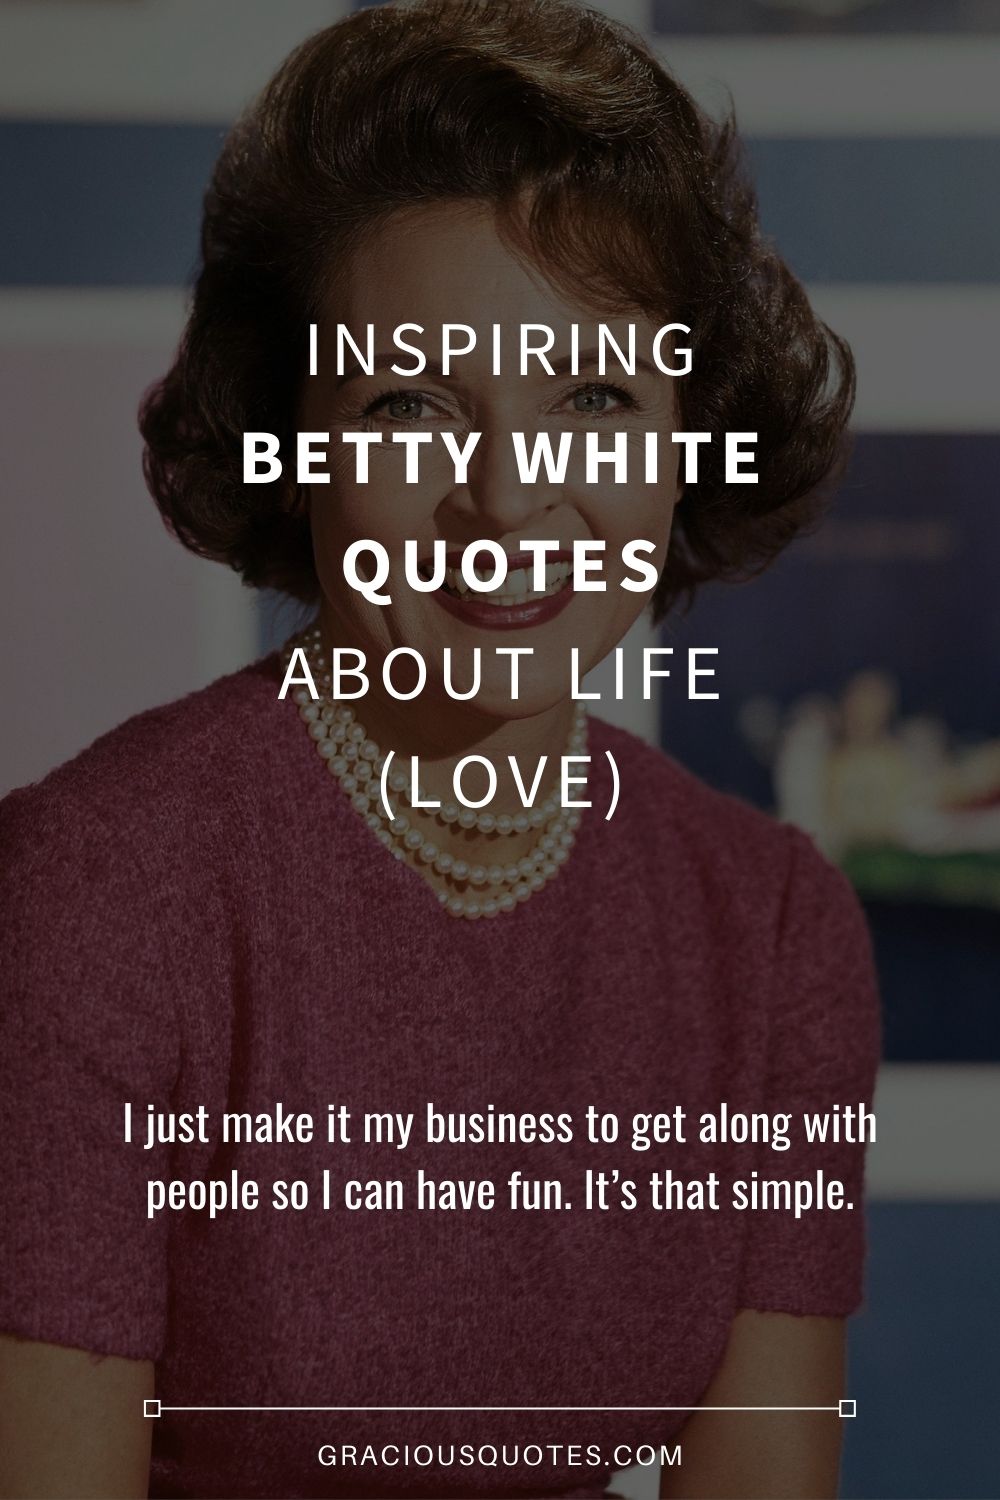 Inspiring Betty White Quotes About Life (LOVE) - Gracious Quotes